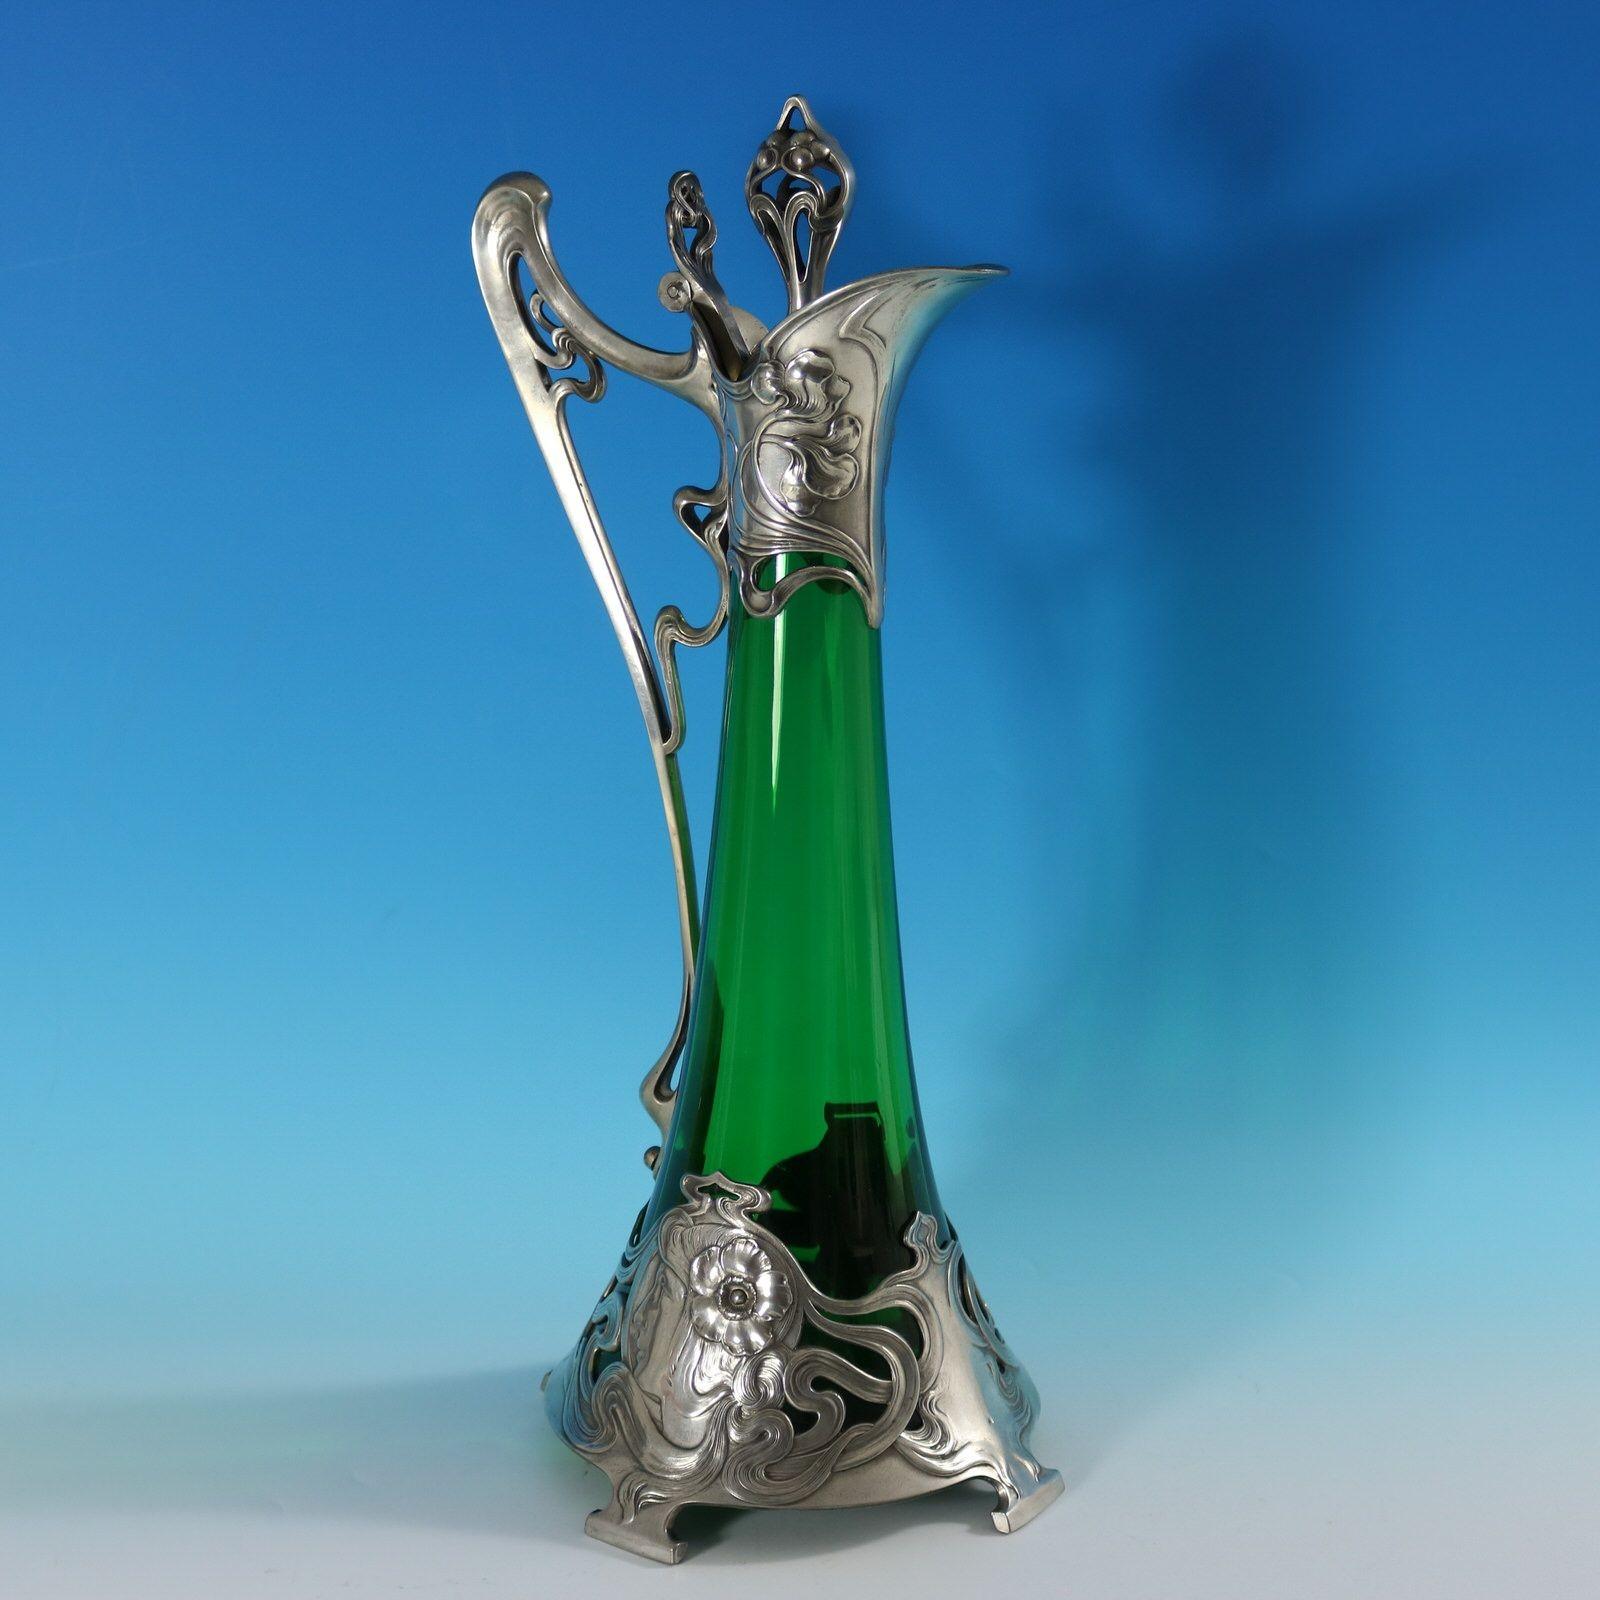 WMF green glass claret jug of typical Art Nouveau stylised form. The bottom mount depictis a maiden's head with a flower in her hair. The hair flows around the piece creating a winding pattern. The upper mount has floral motifs. The finial modelled